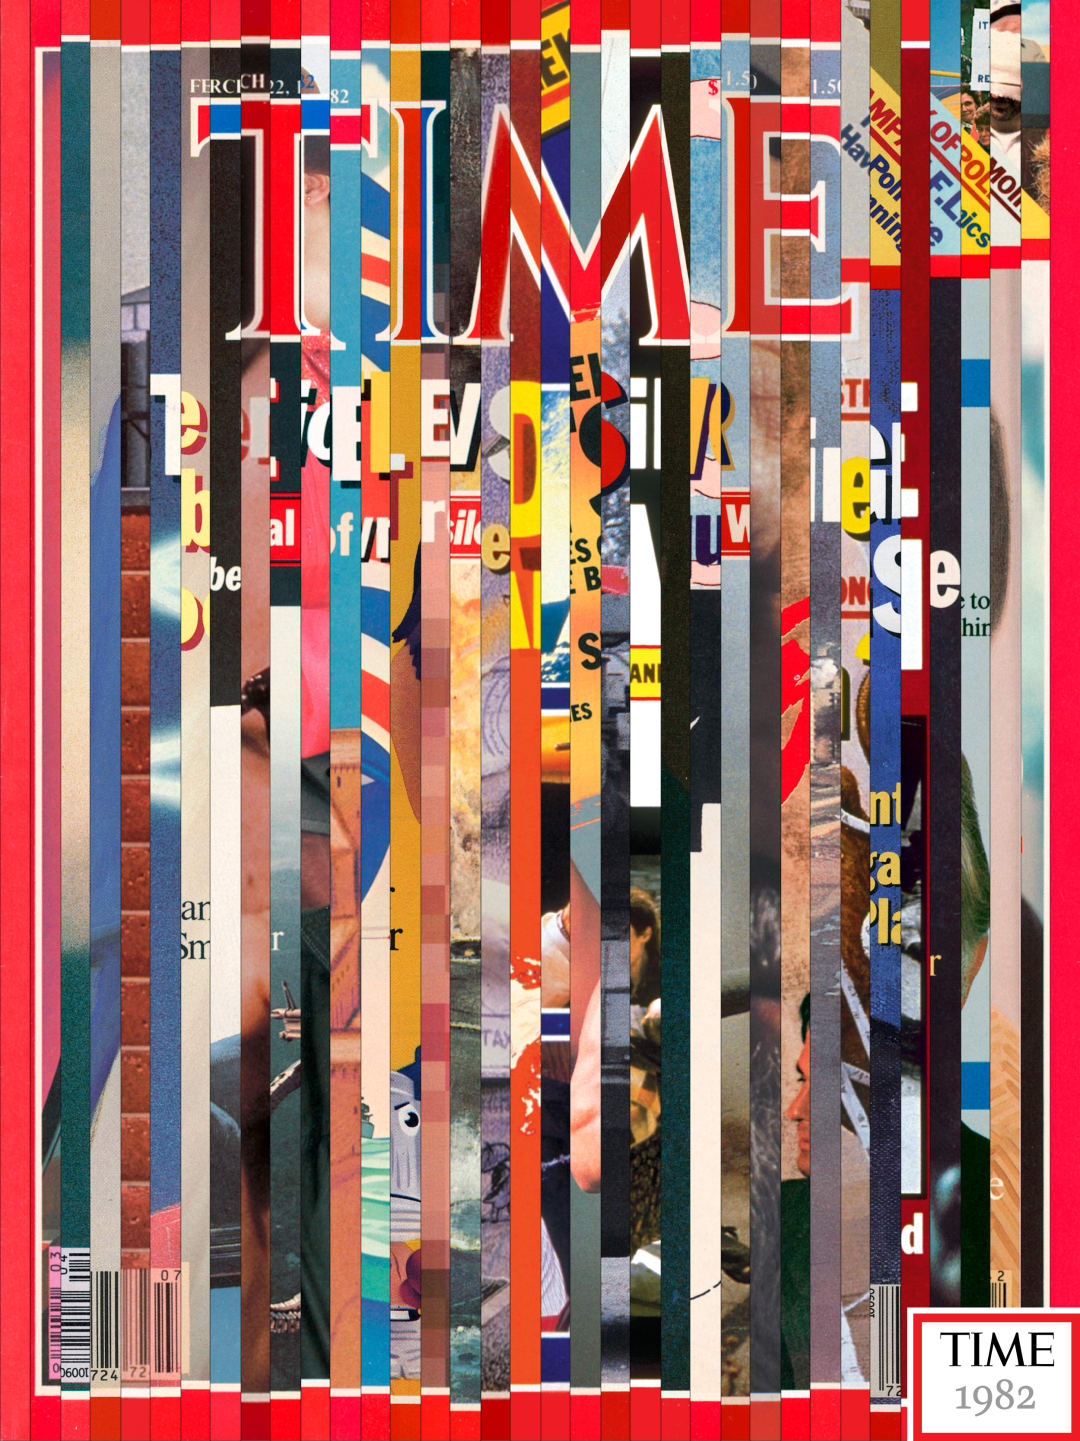 Slice of TIME, 1982 by DW Pine